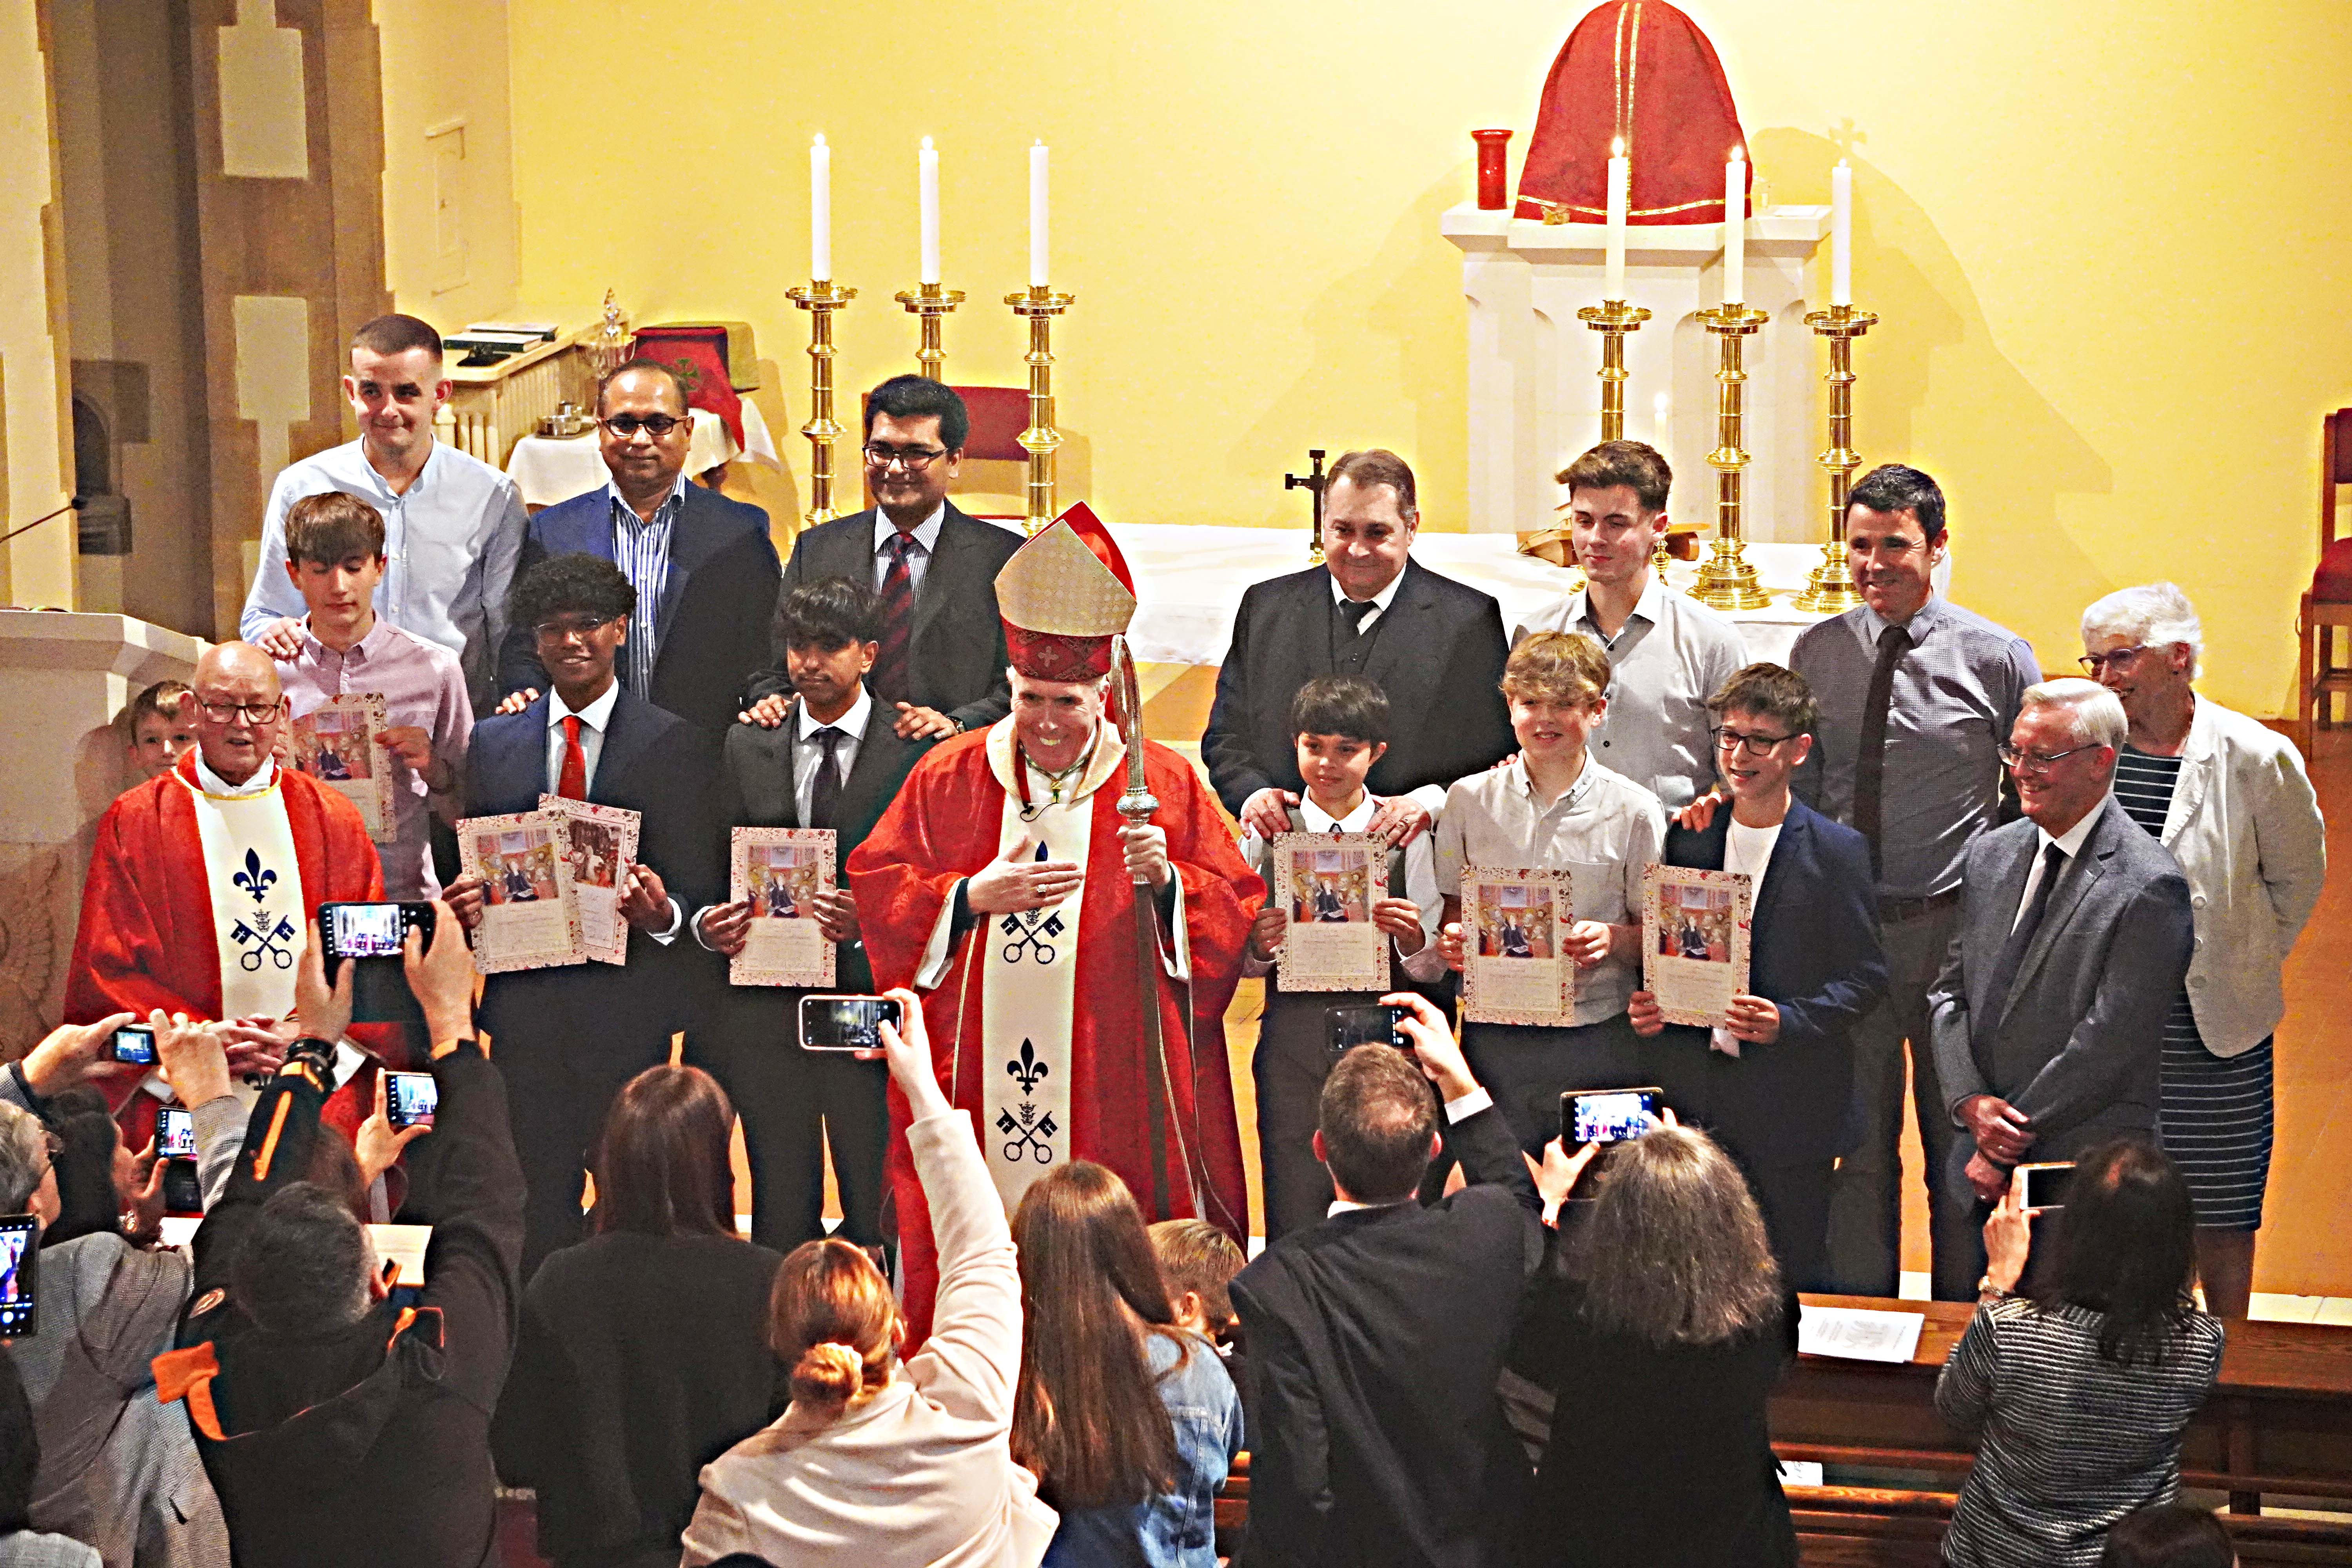 Confirmation candidates gather with relatives, the bishop and Canon John Barnes (Photo: Alan Lamberton and Wilf Ablard)